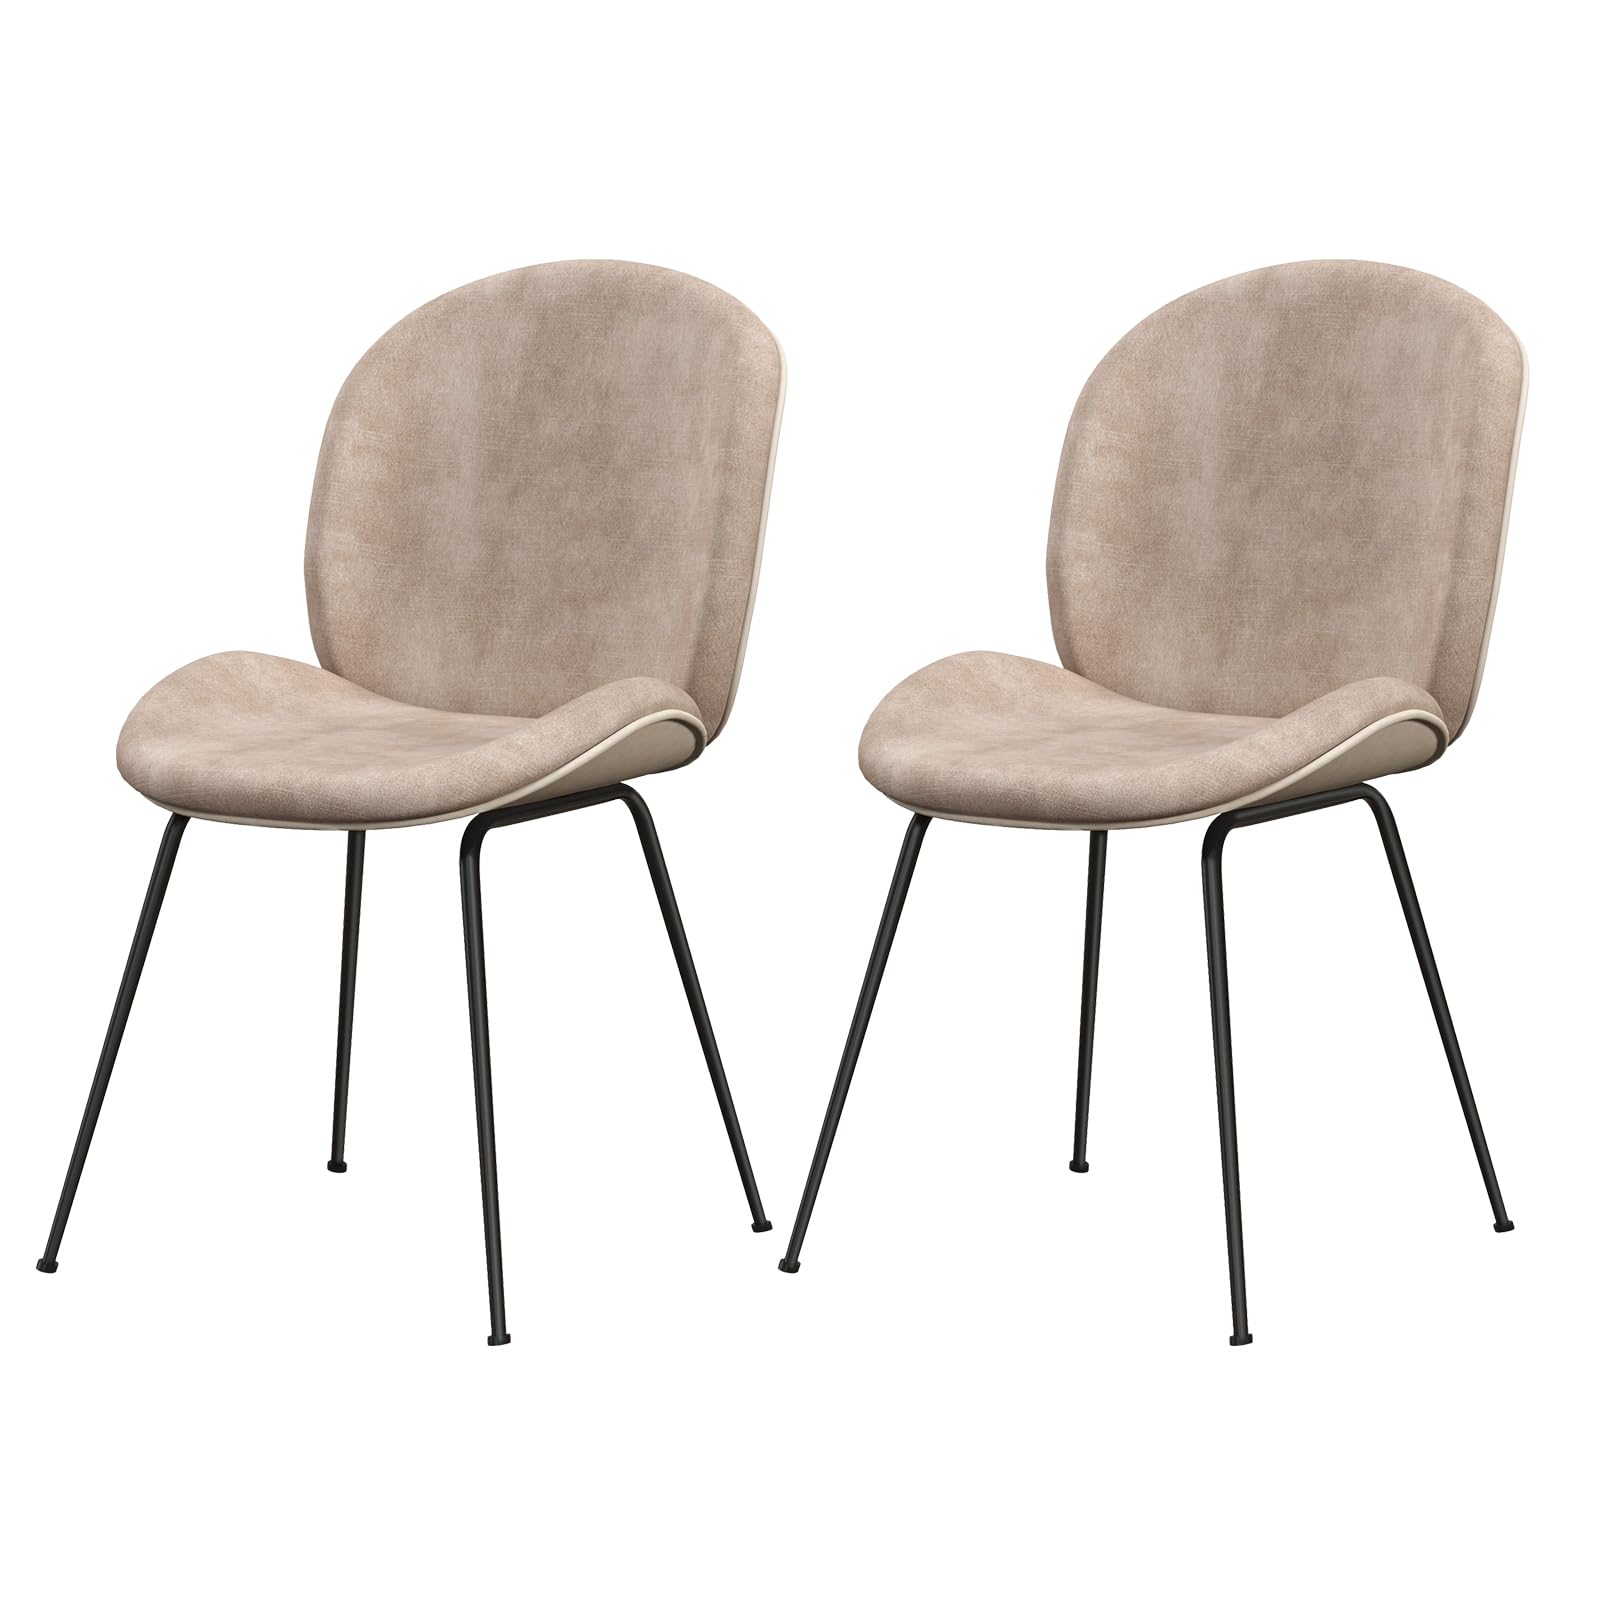 Giantex Dining Chairs Set of 4